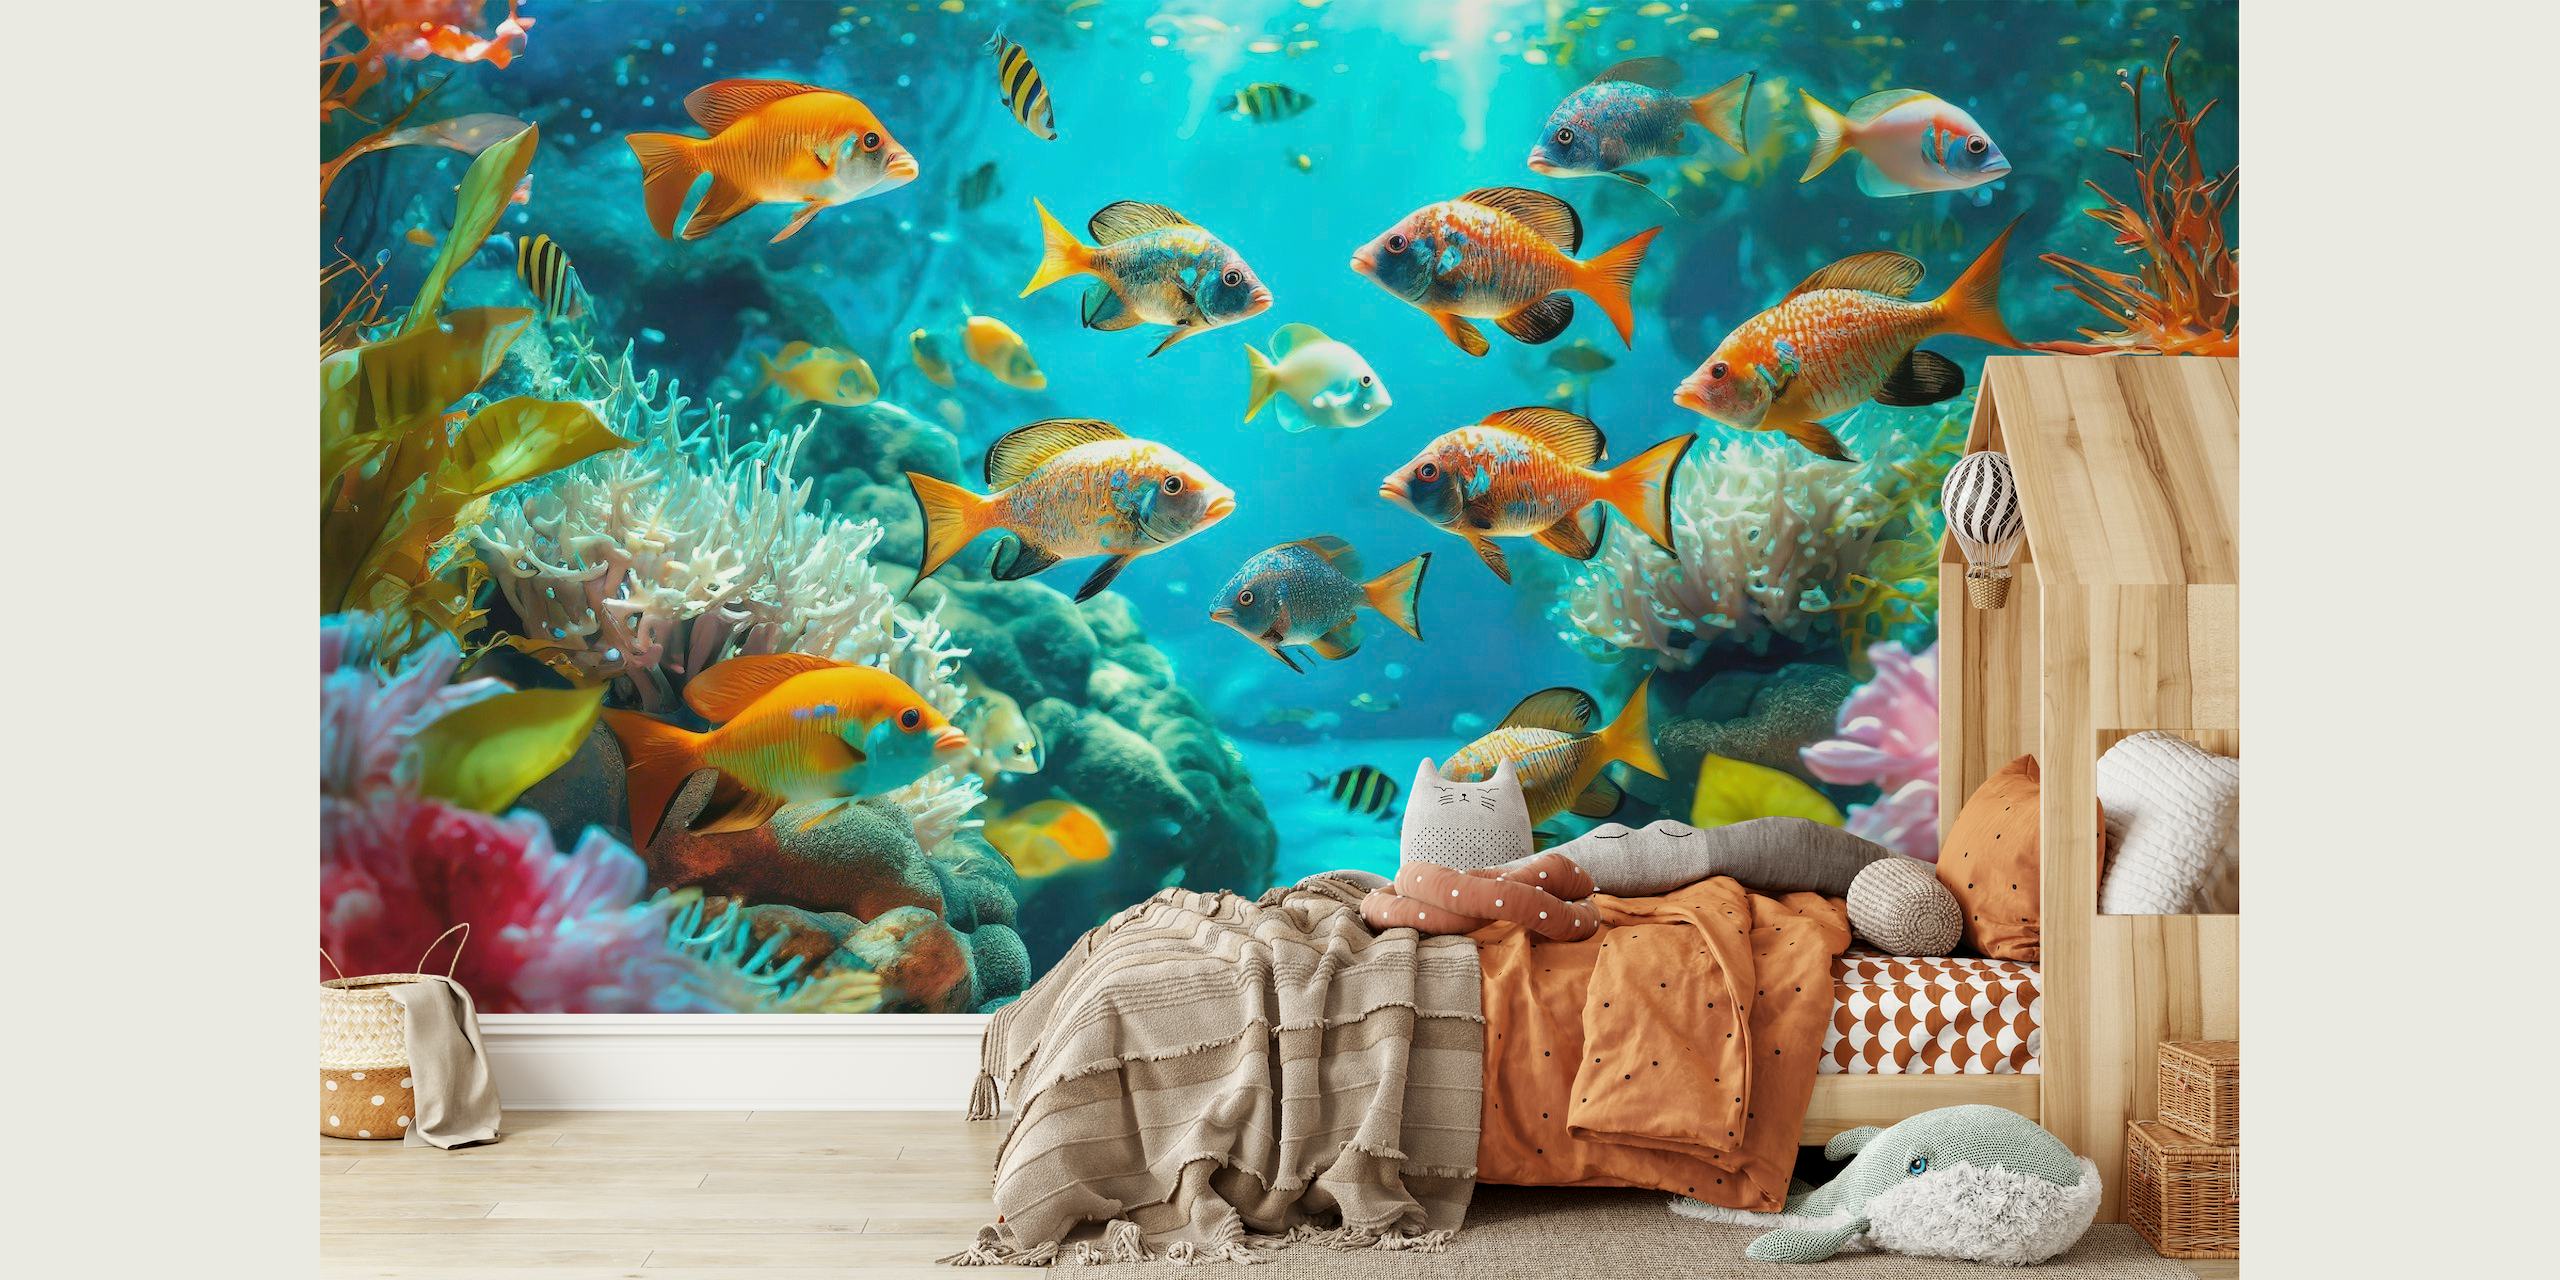 A vibrant underwater wall mural featuring colorful fish swimming among coral